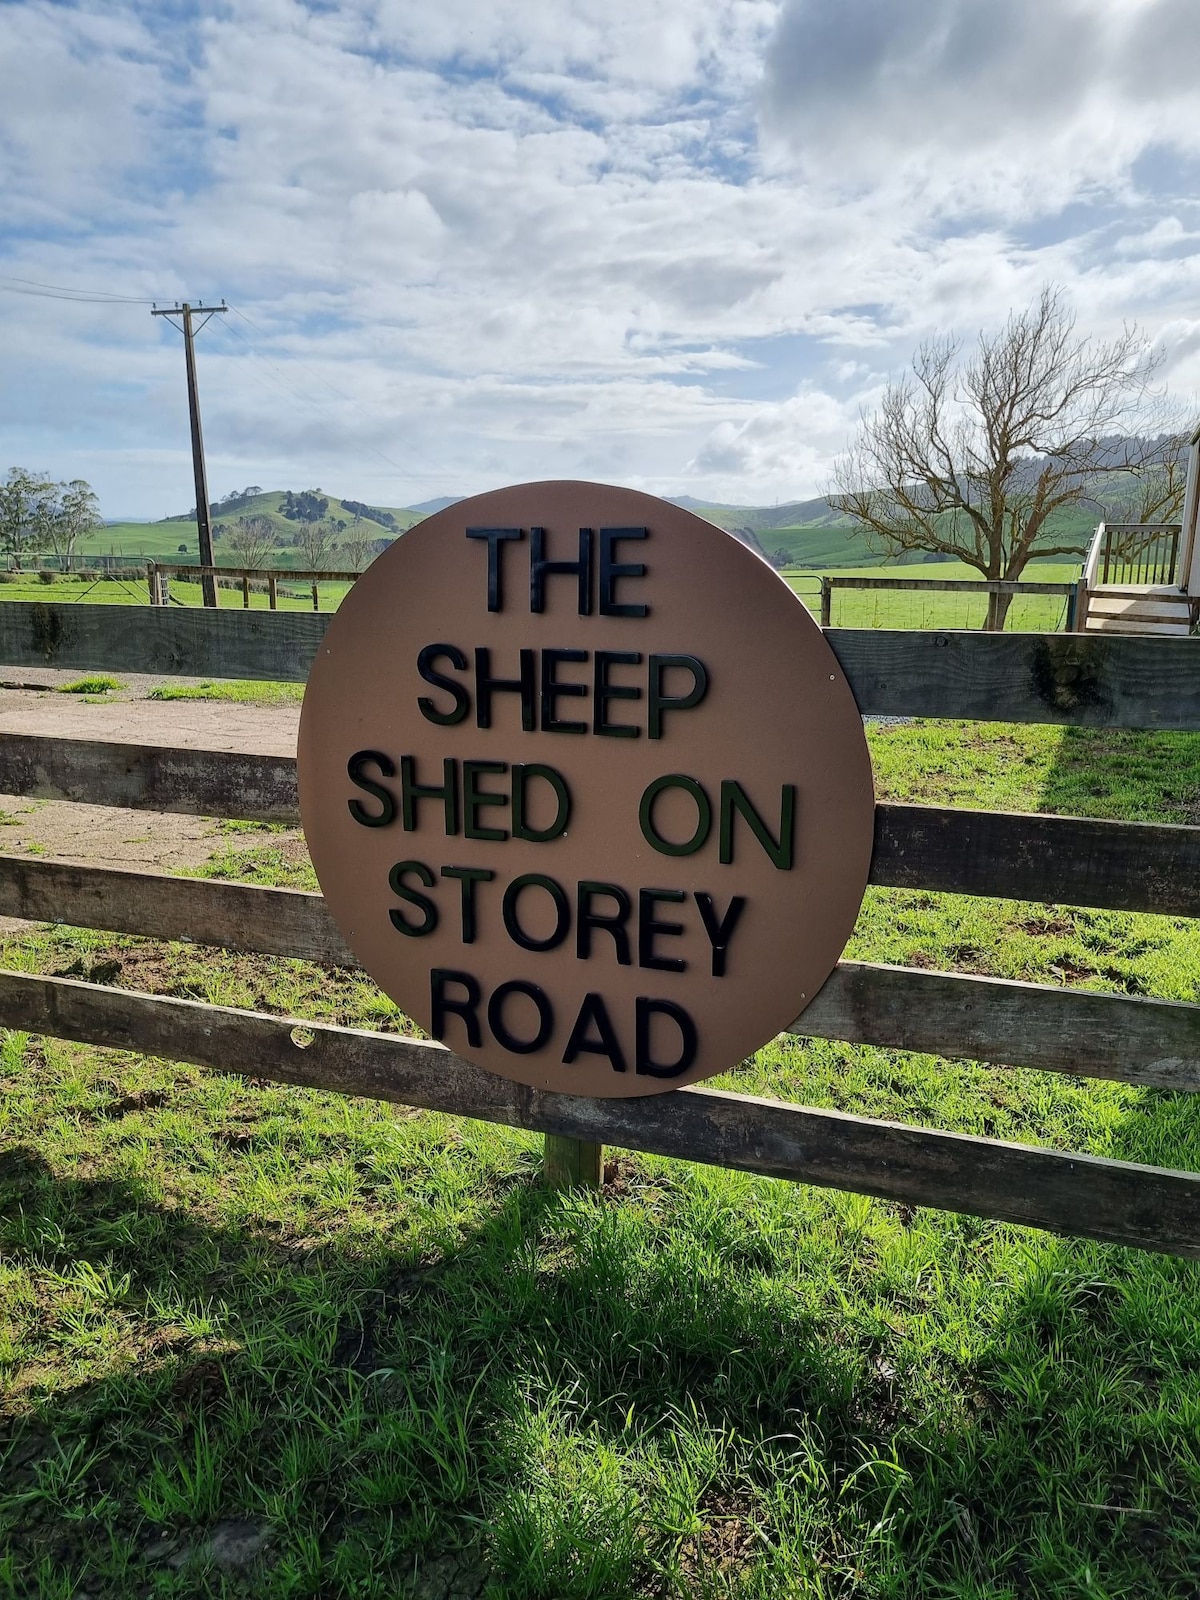 The Sheep Shed on Storey